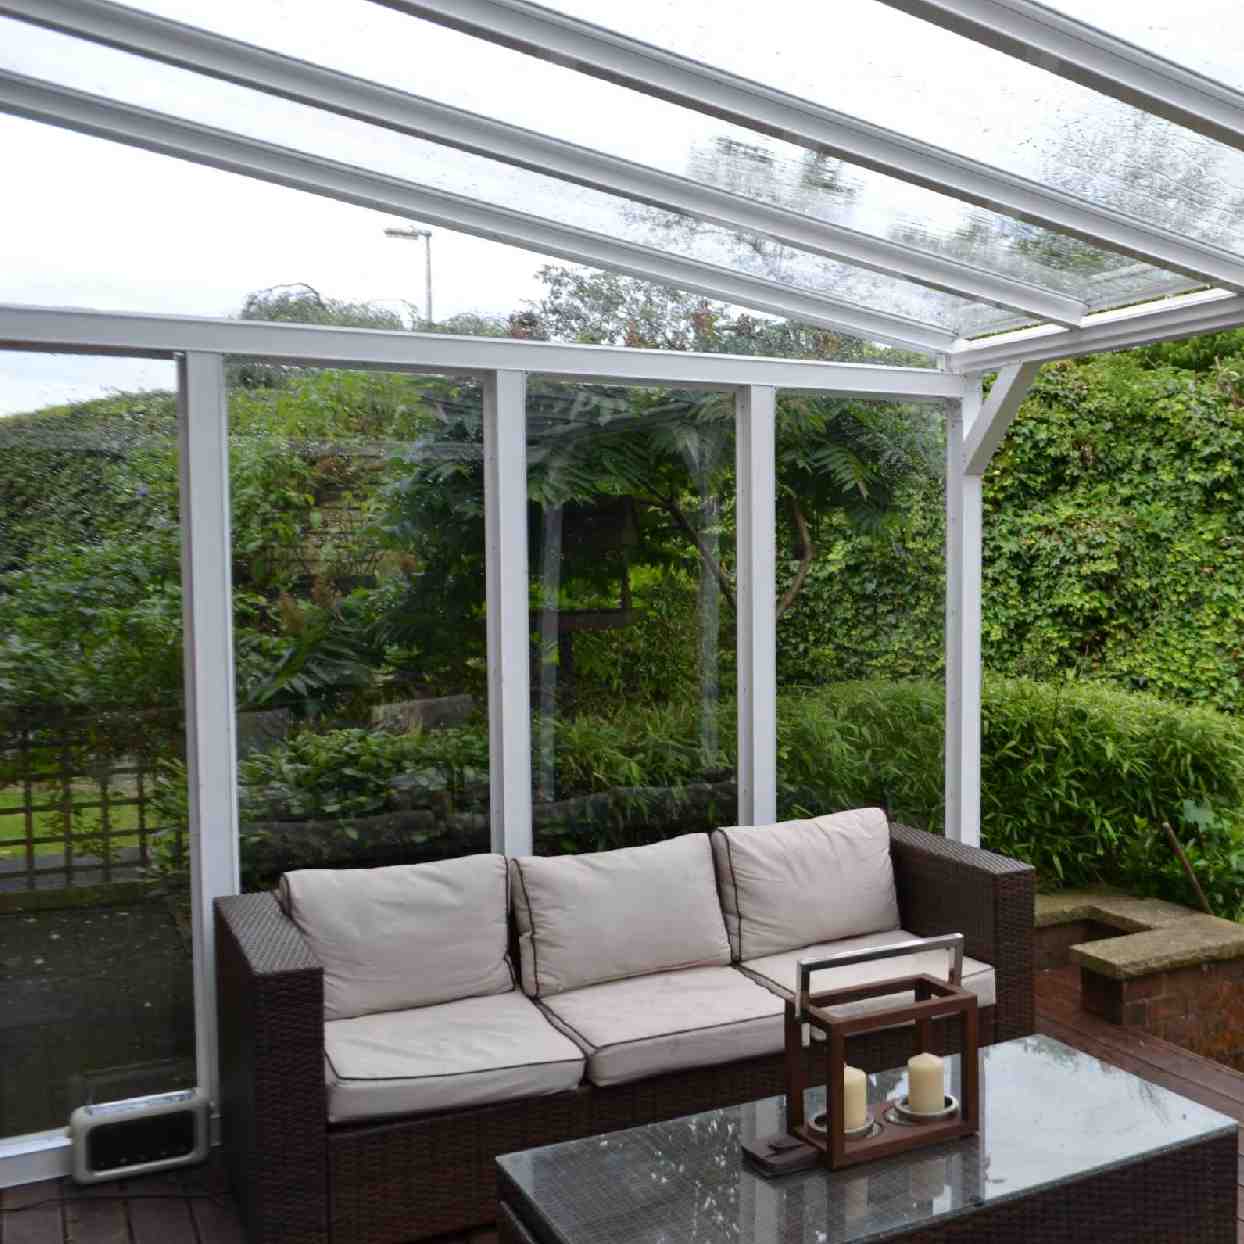 Buy Omega Verandah White with 16mm Polycarbonate Glazing - 11.4m (W) x 3.5m (P), (5) Supporting Posts online today